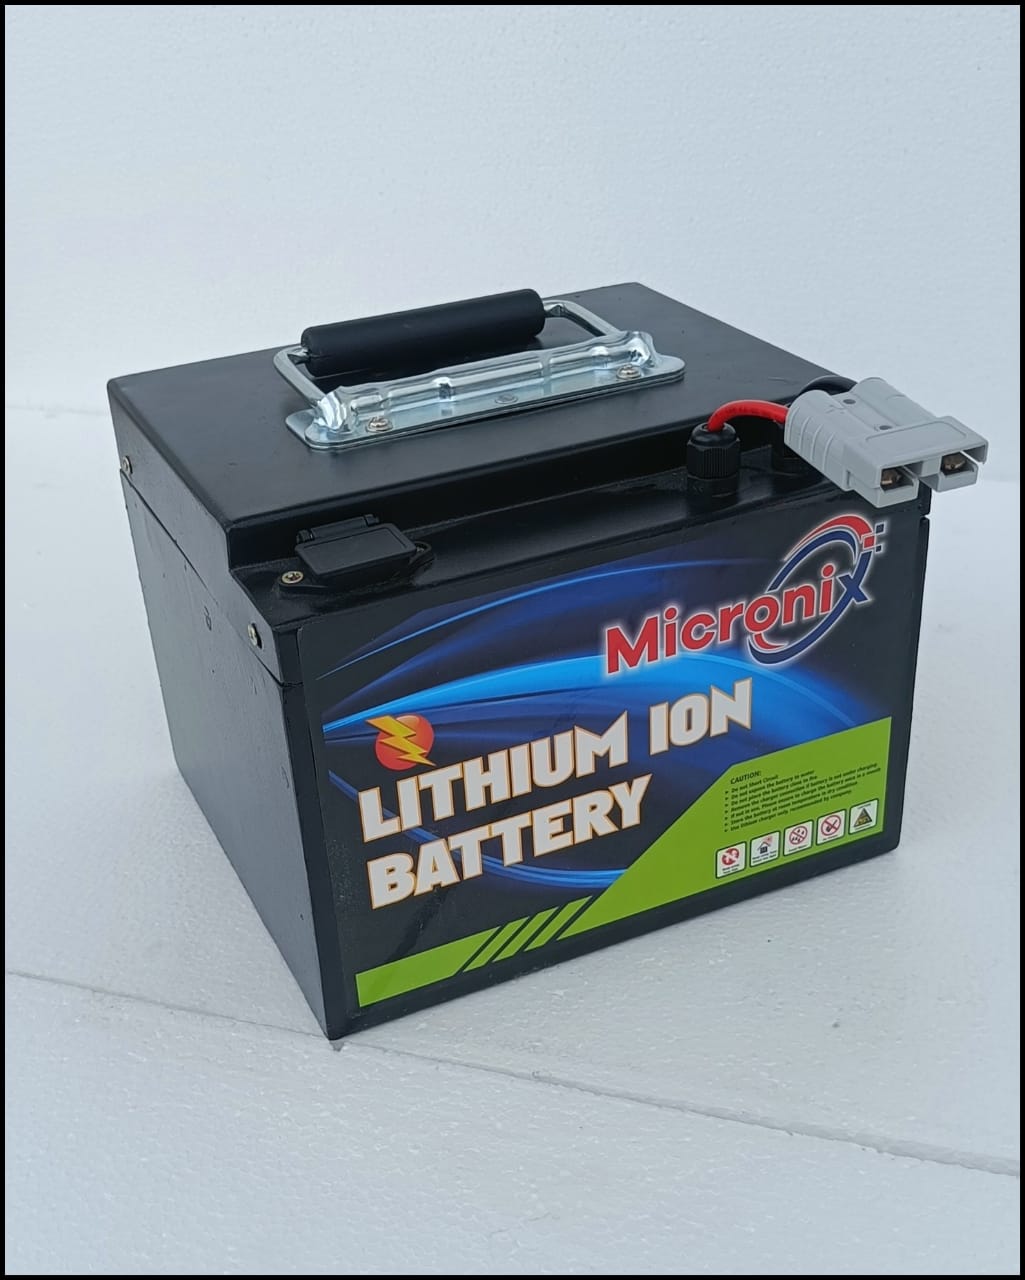 Electric Scooter Battery